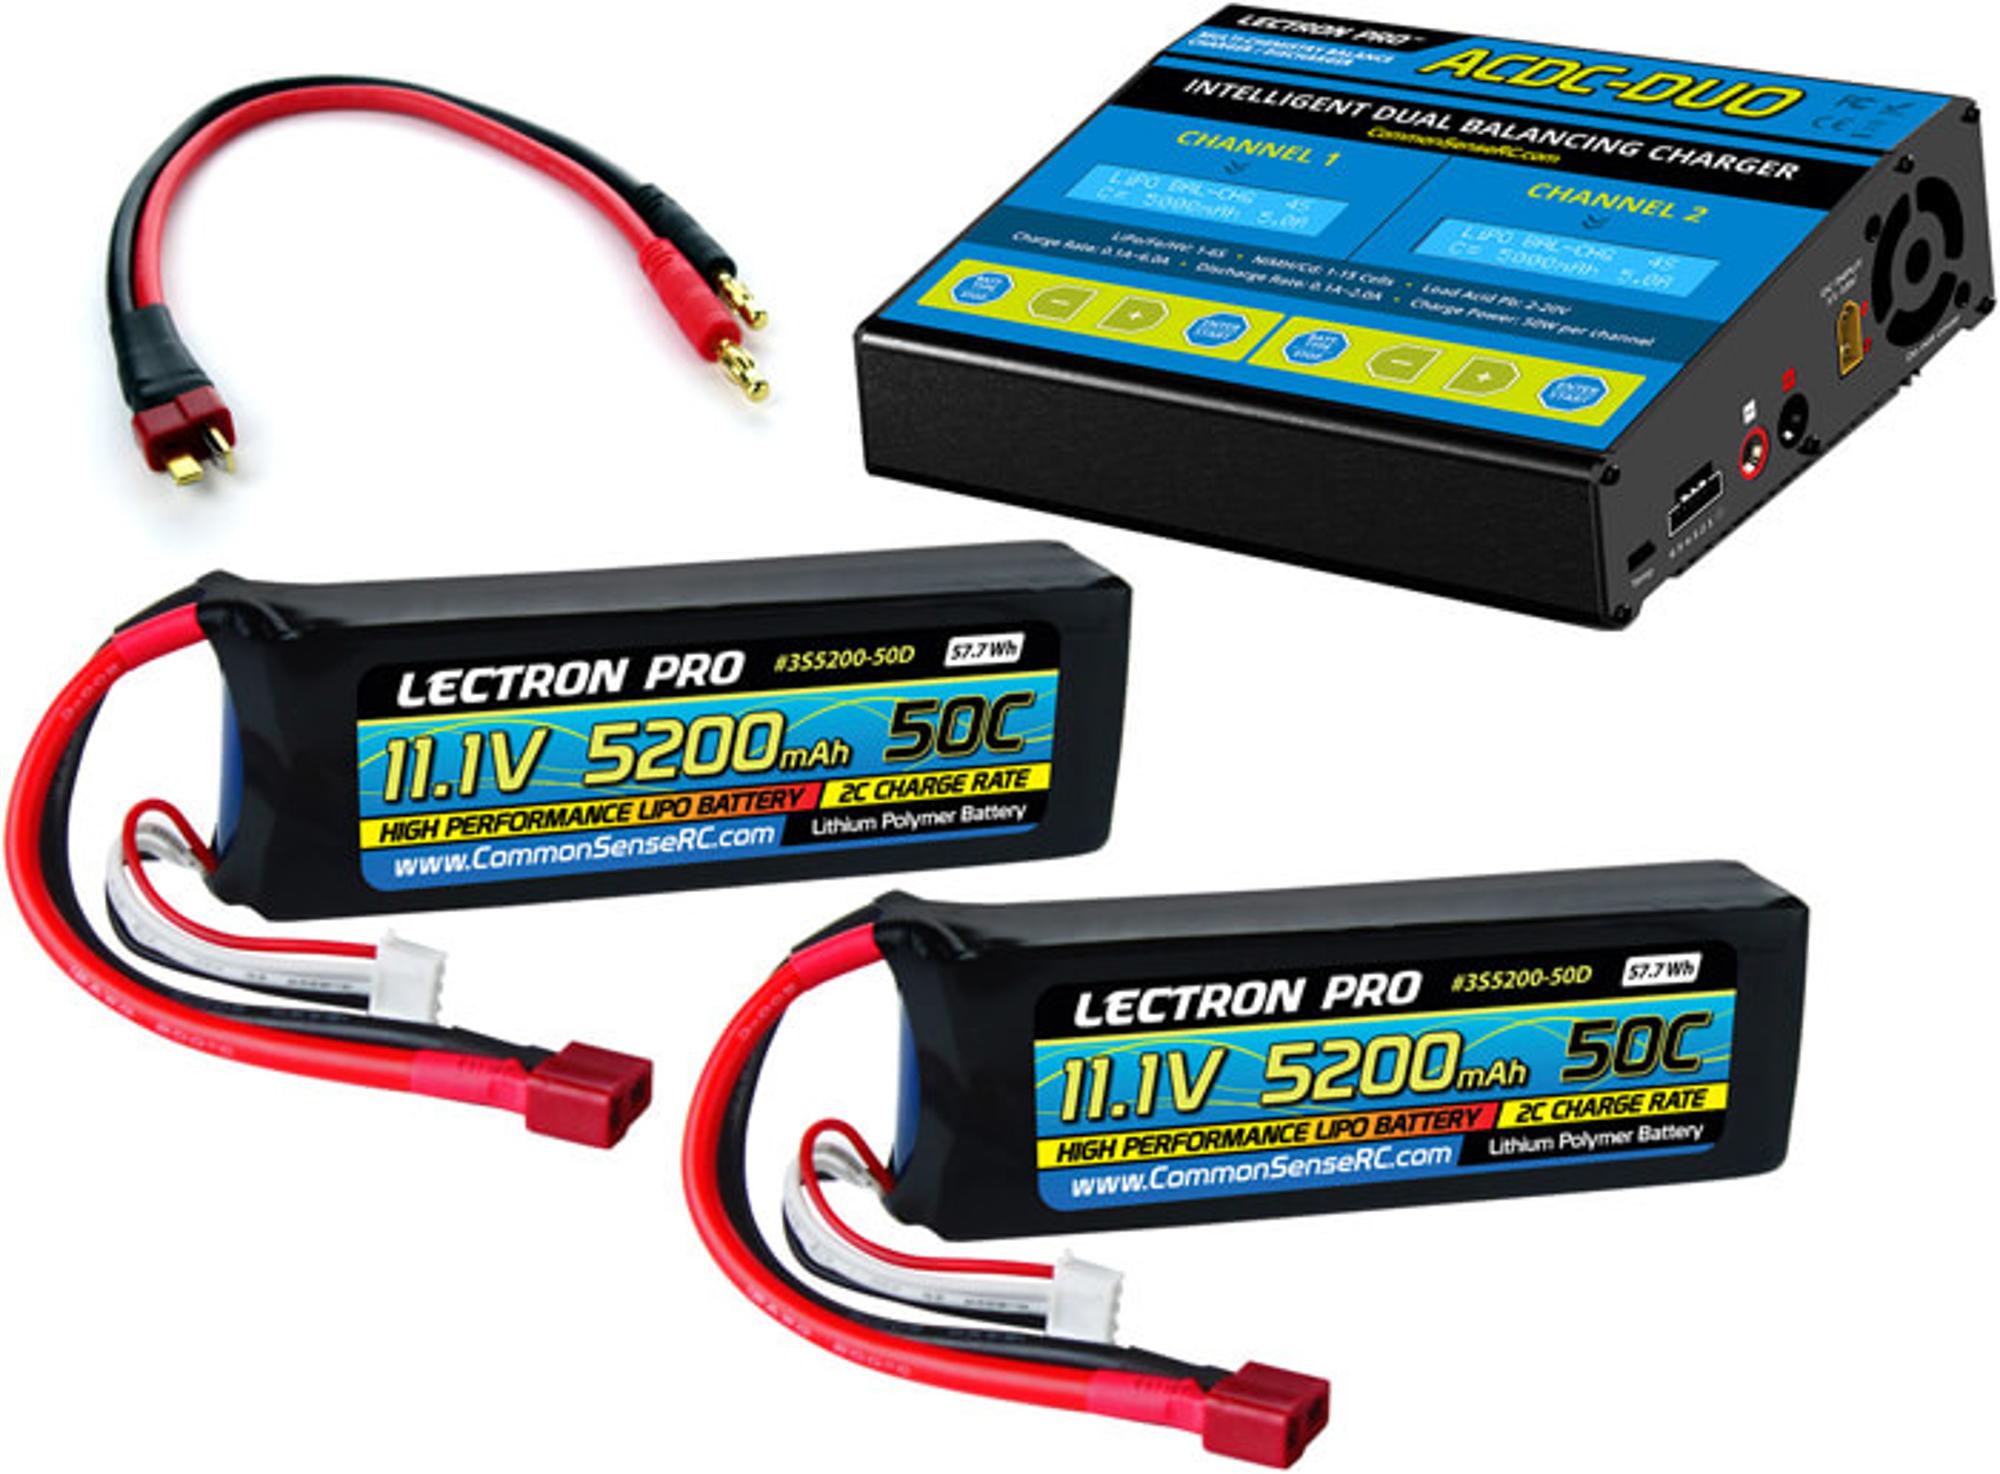 Power Pack #24 - ACDC DUO Charger, 2x 11.1V 5200mAh 50C LiPo Battery